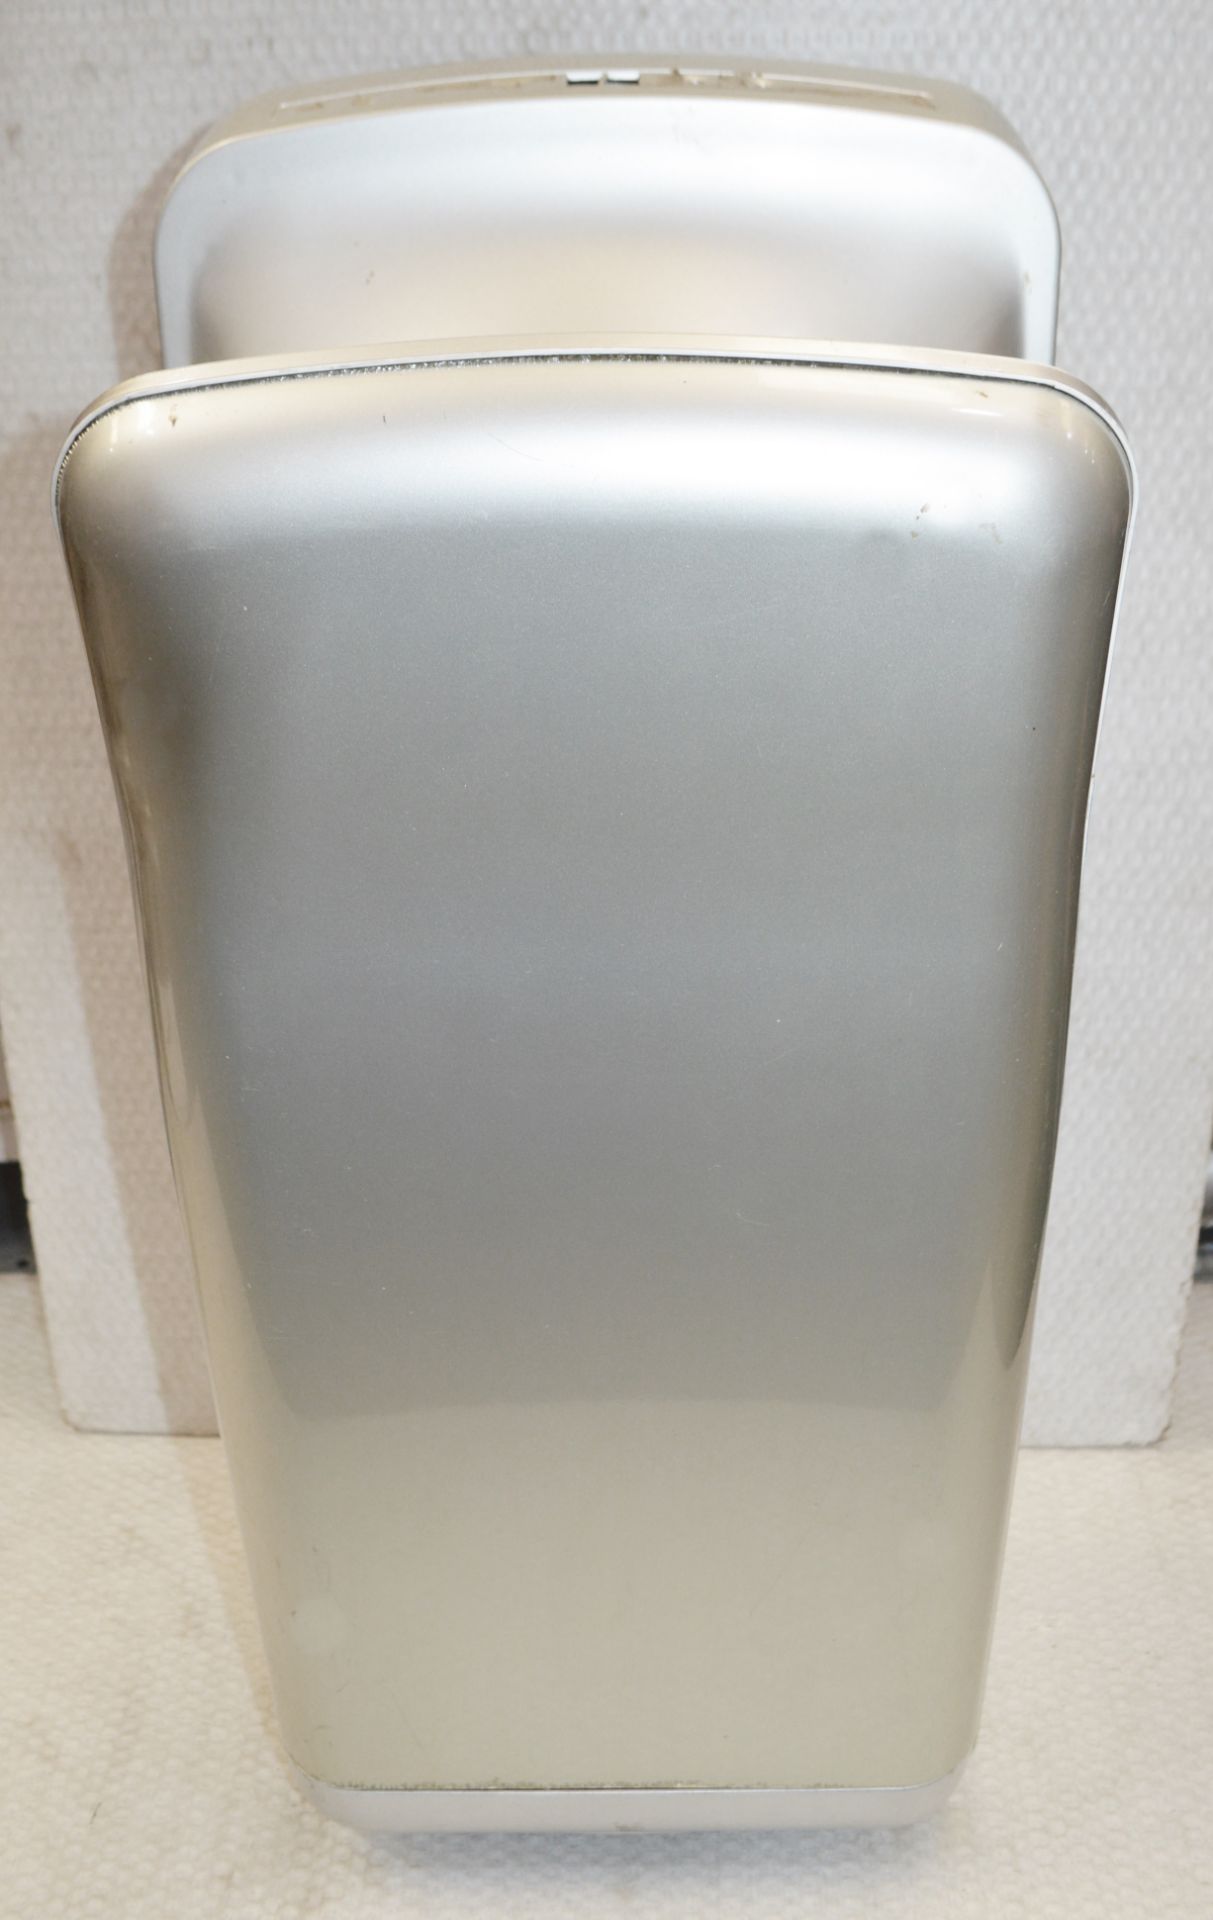 1 x Gorillo Blade Hand Dryer - Model: HdG1000 - RRP £384 - Recently Removed From A Commercial